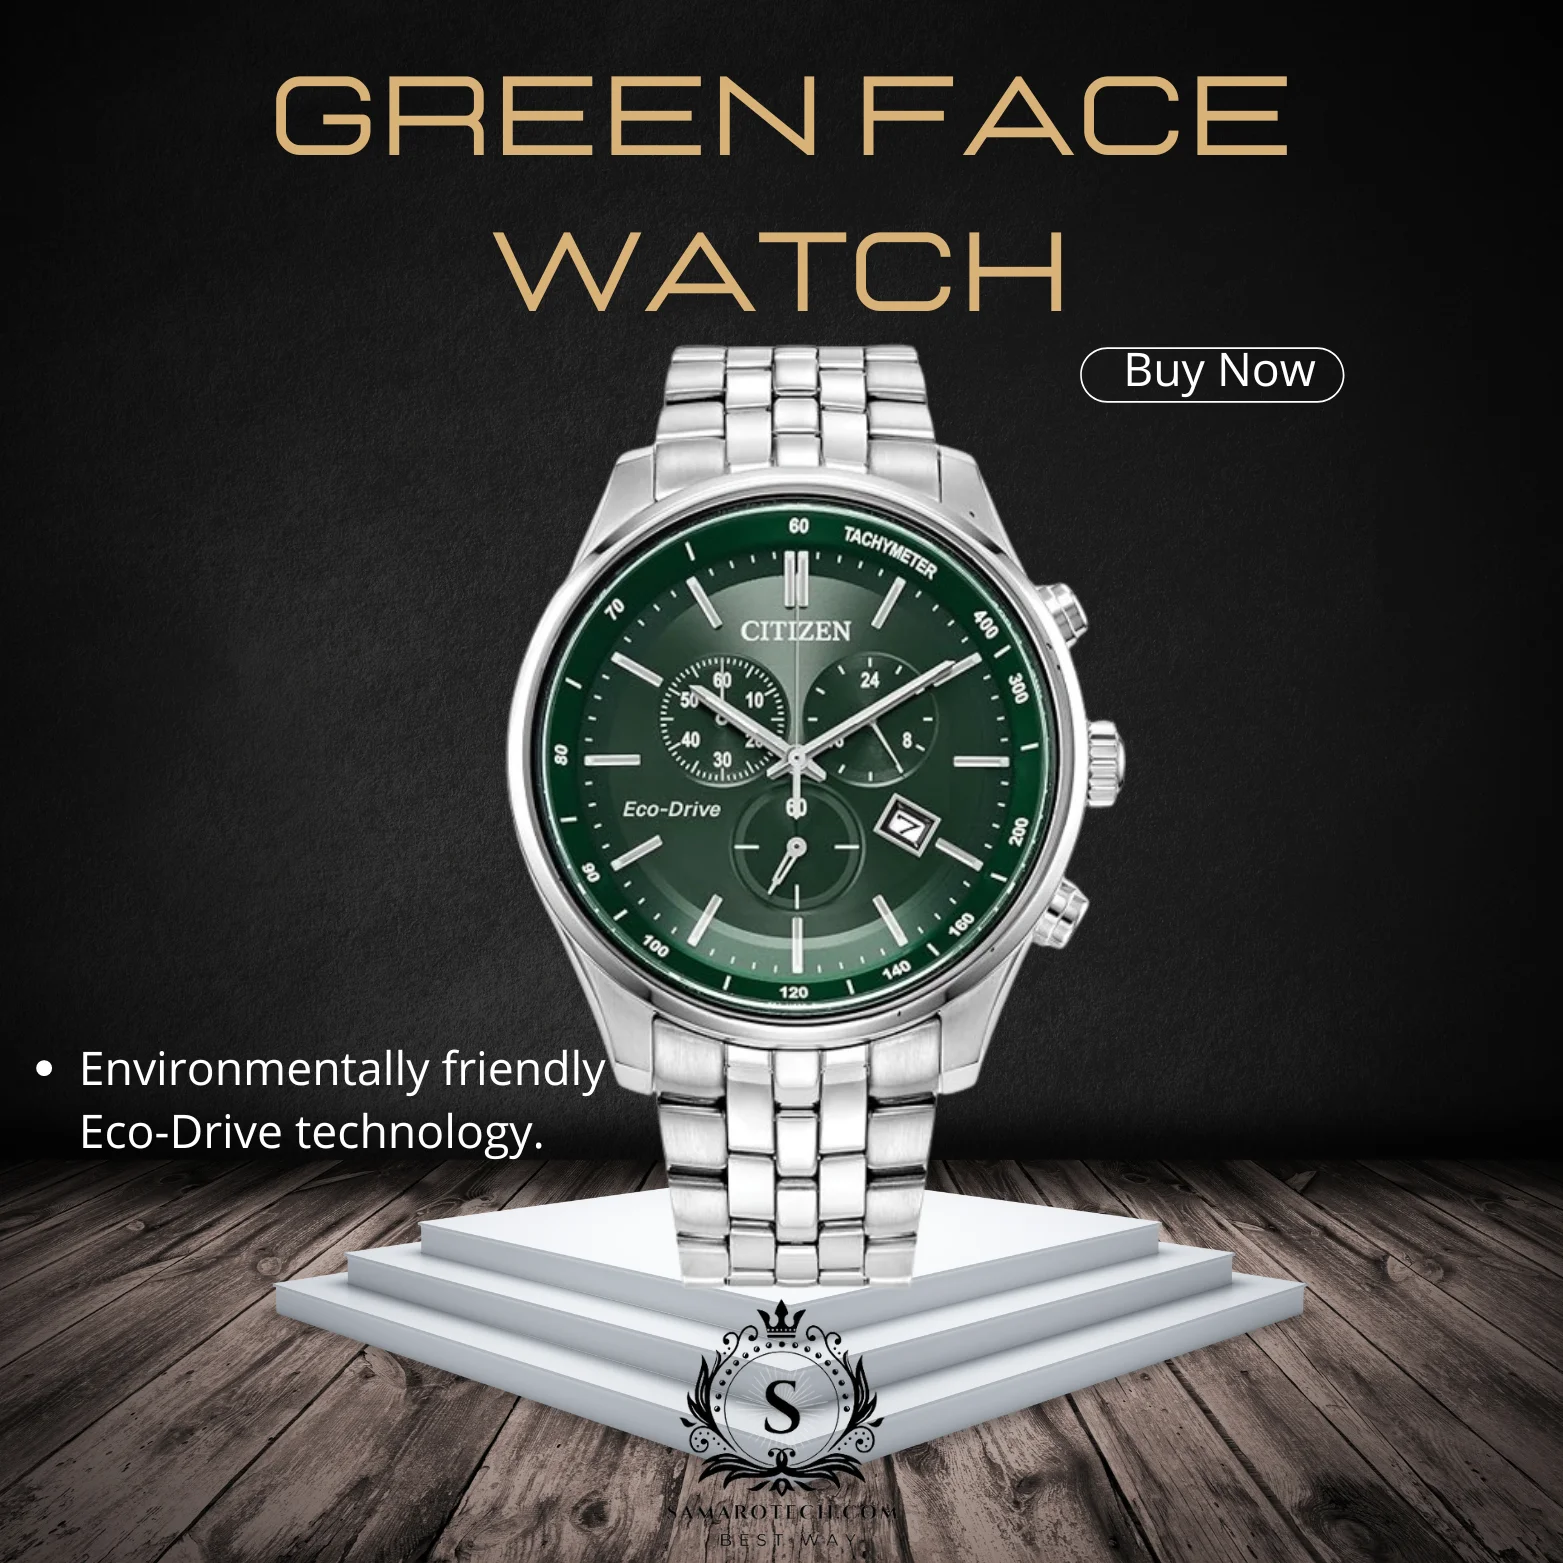 Green Face Watch: Top 5 Timeless and stylish timepices Picks